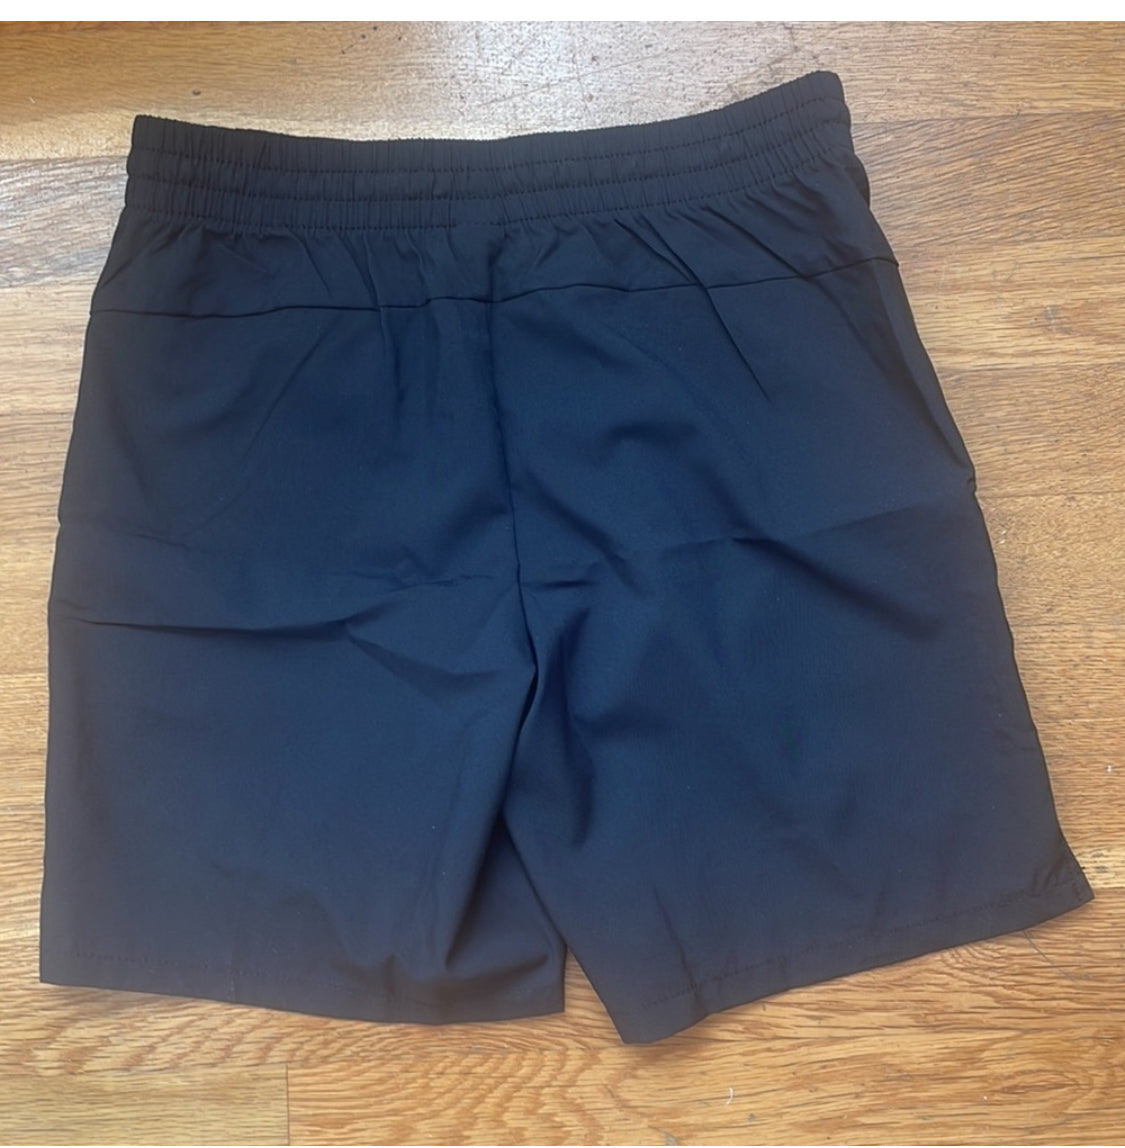 NWT OLD NAVY Quick Dry Jogger Stretch Shorts in Black size Large 10-12